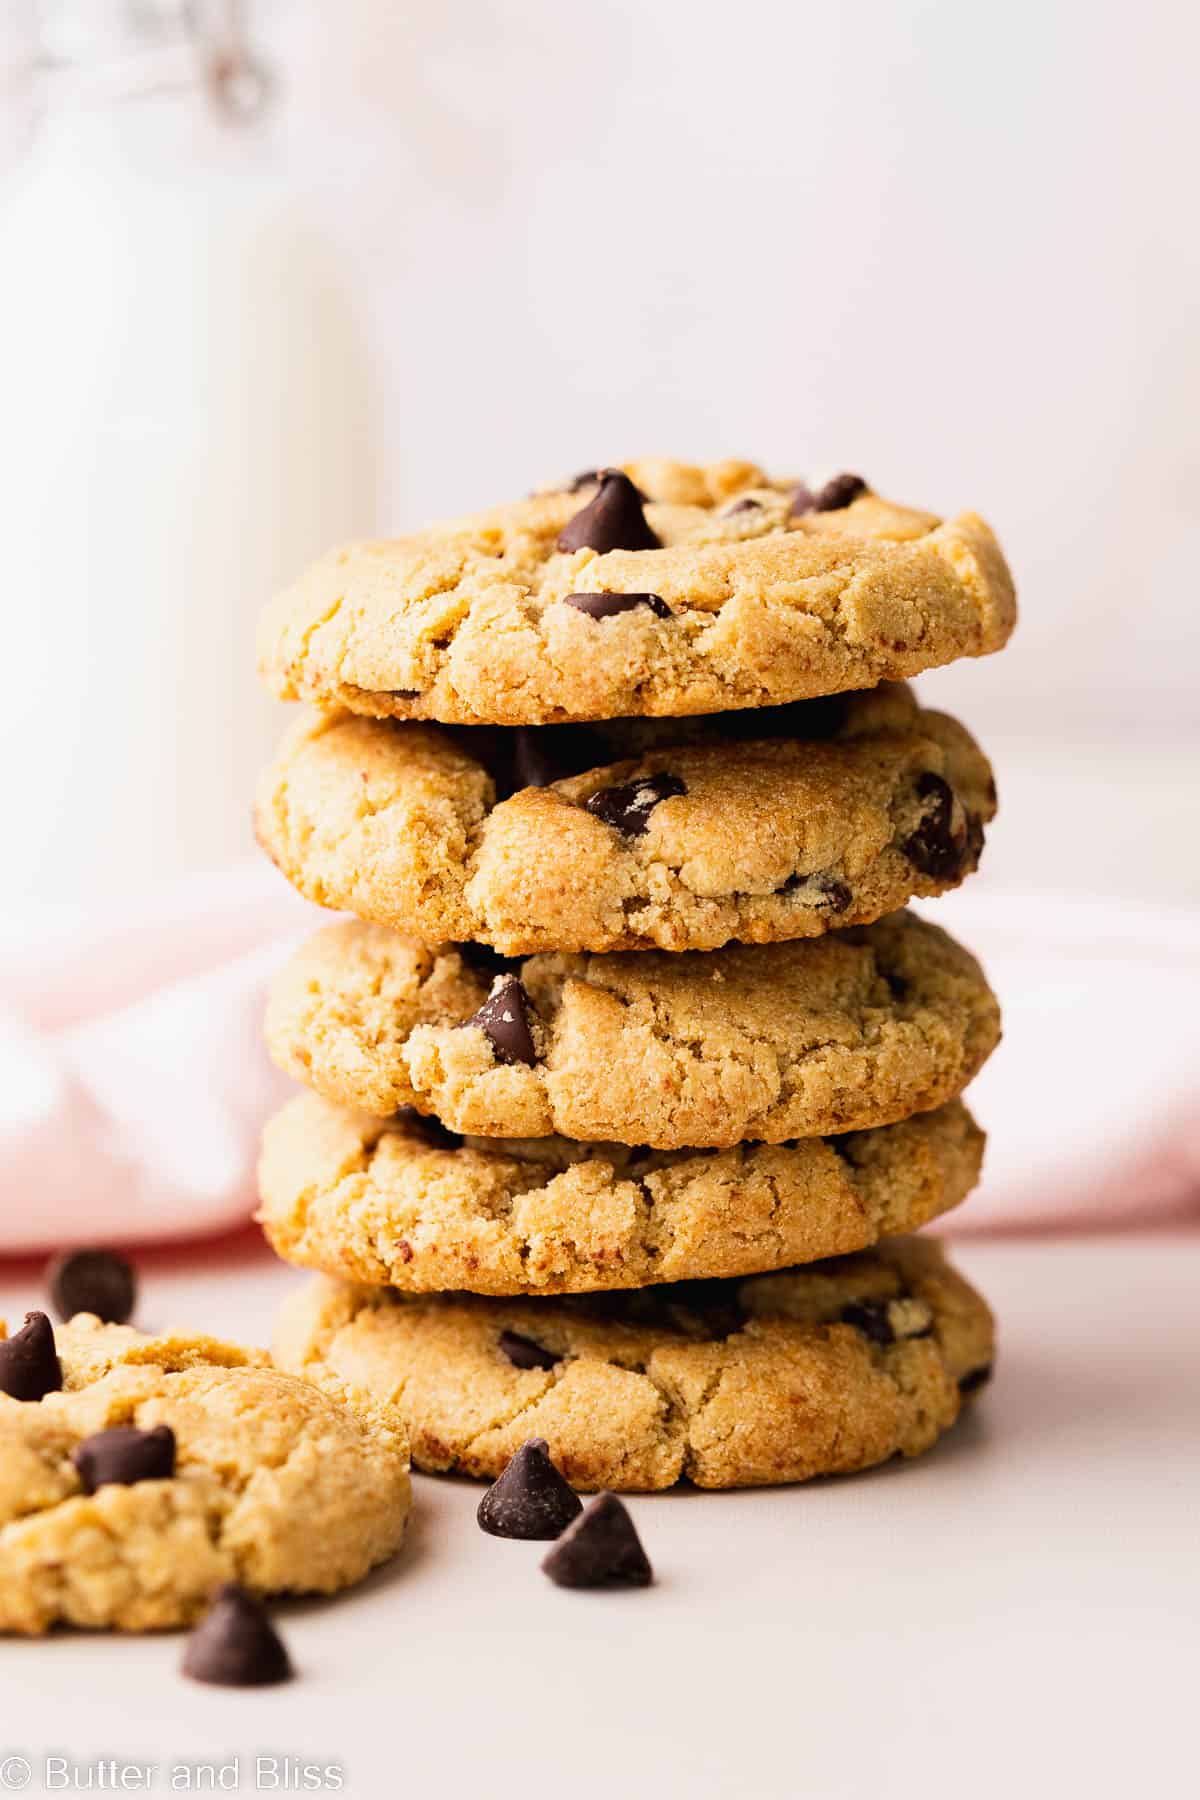 A stack of thick and chewy gluten free chocolate chip cookies.